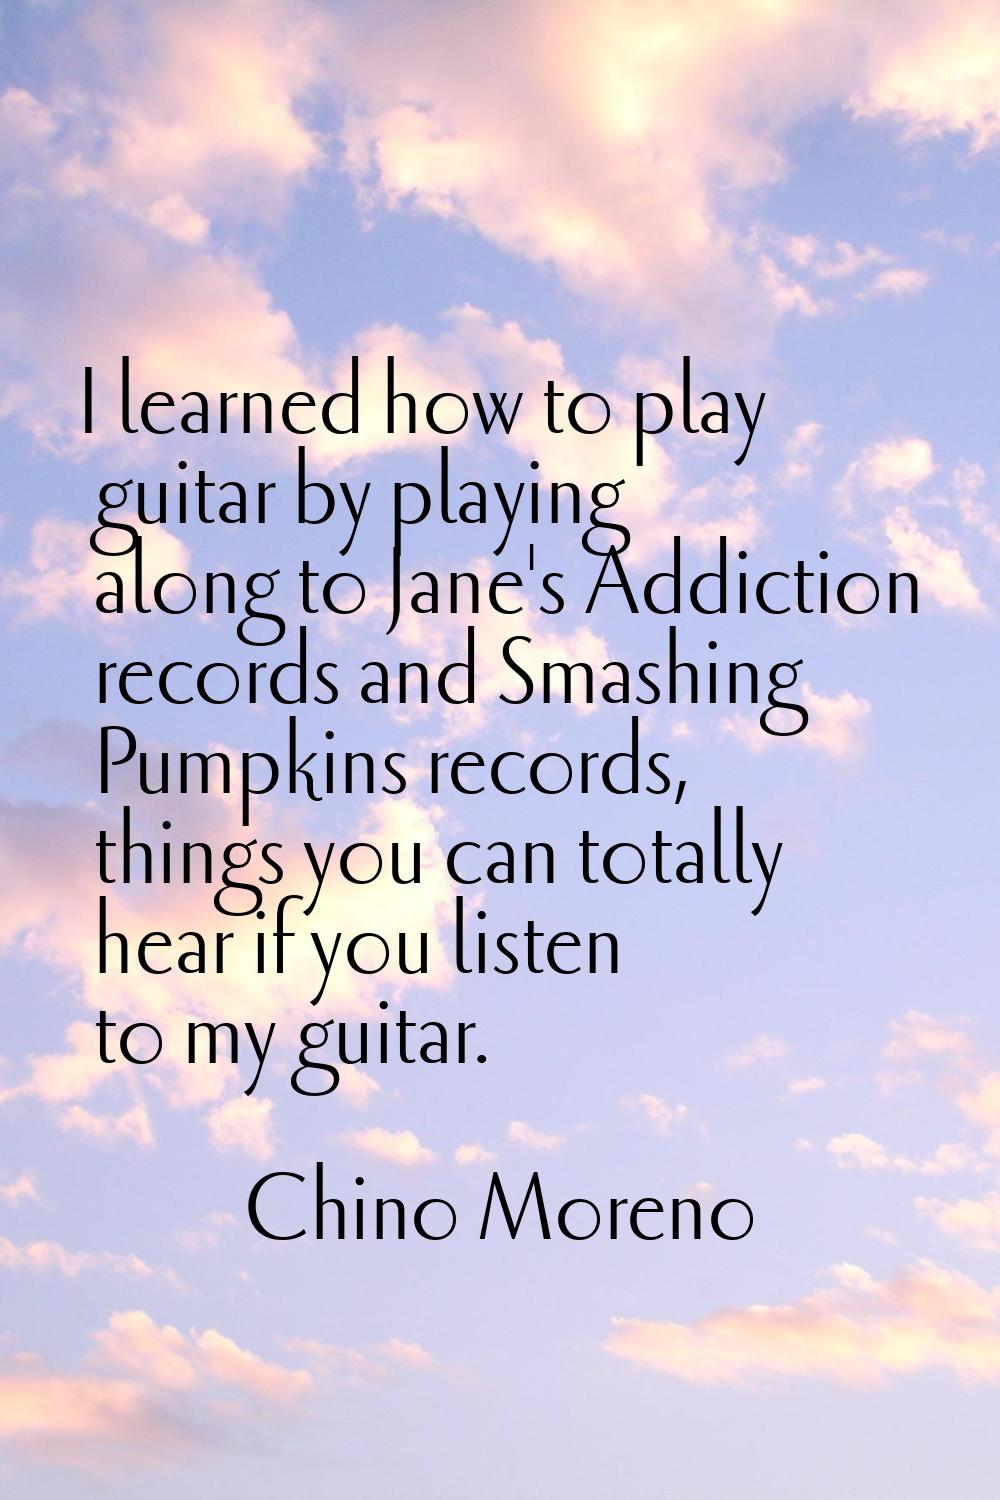 I learned how to play guitar by playing along to Jane's Addiction records and Smashing Pumpkins rec